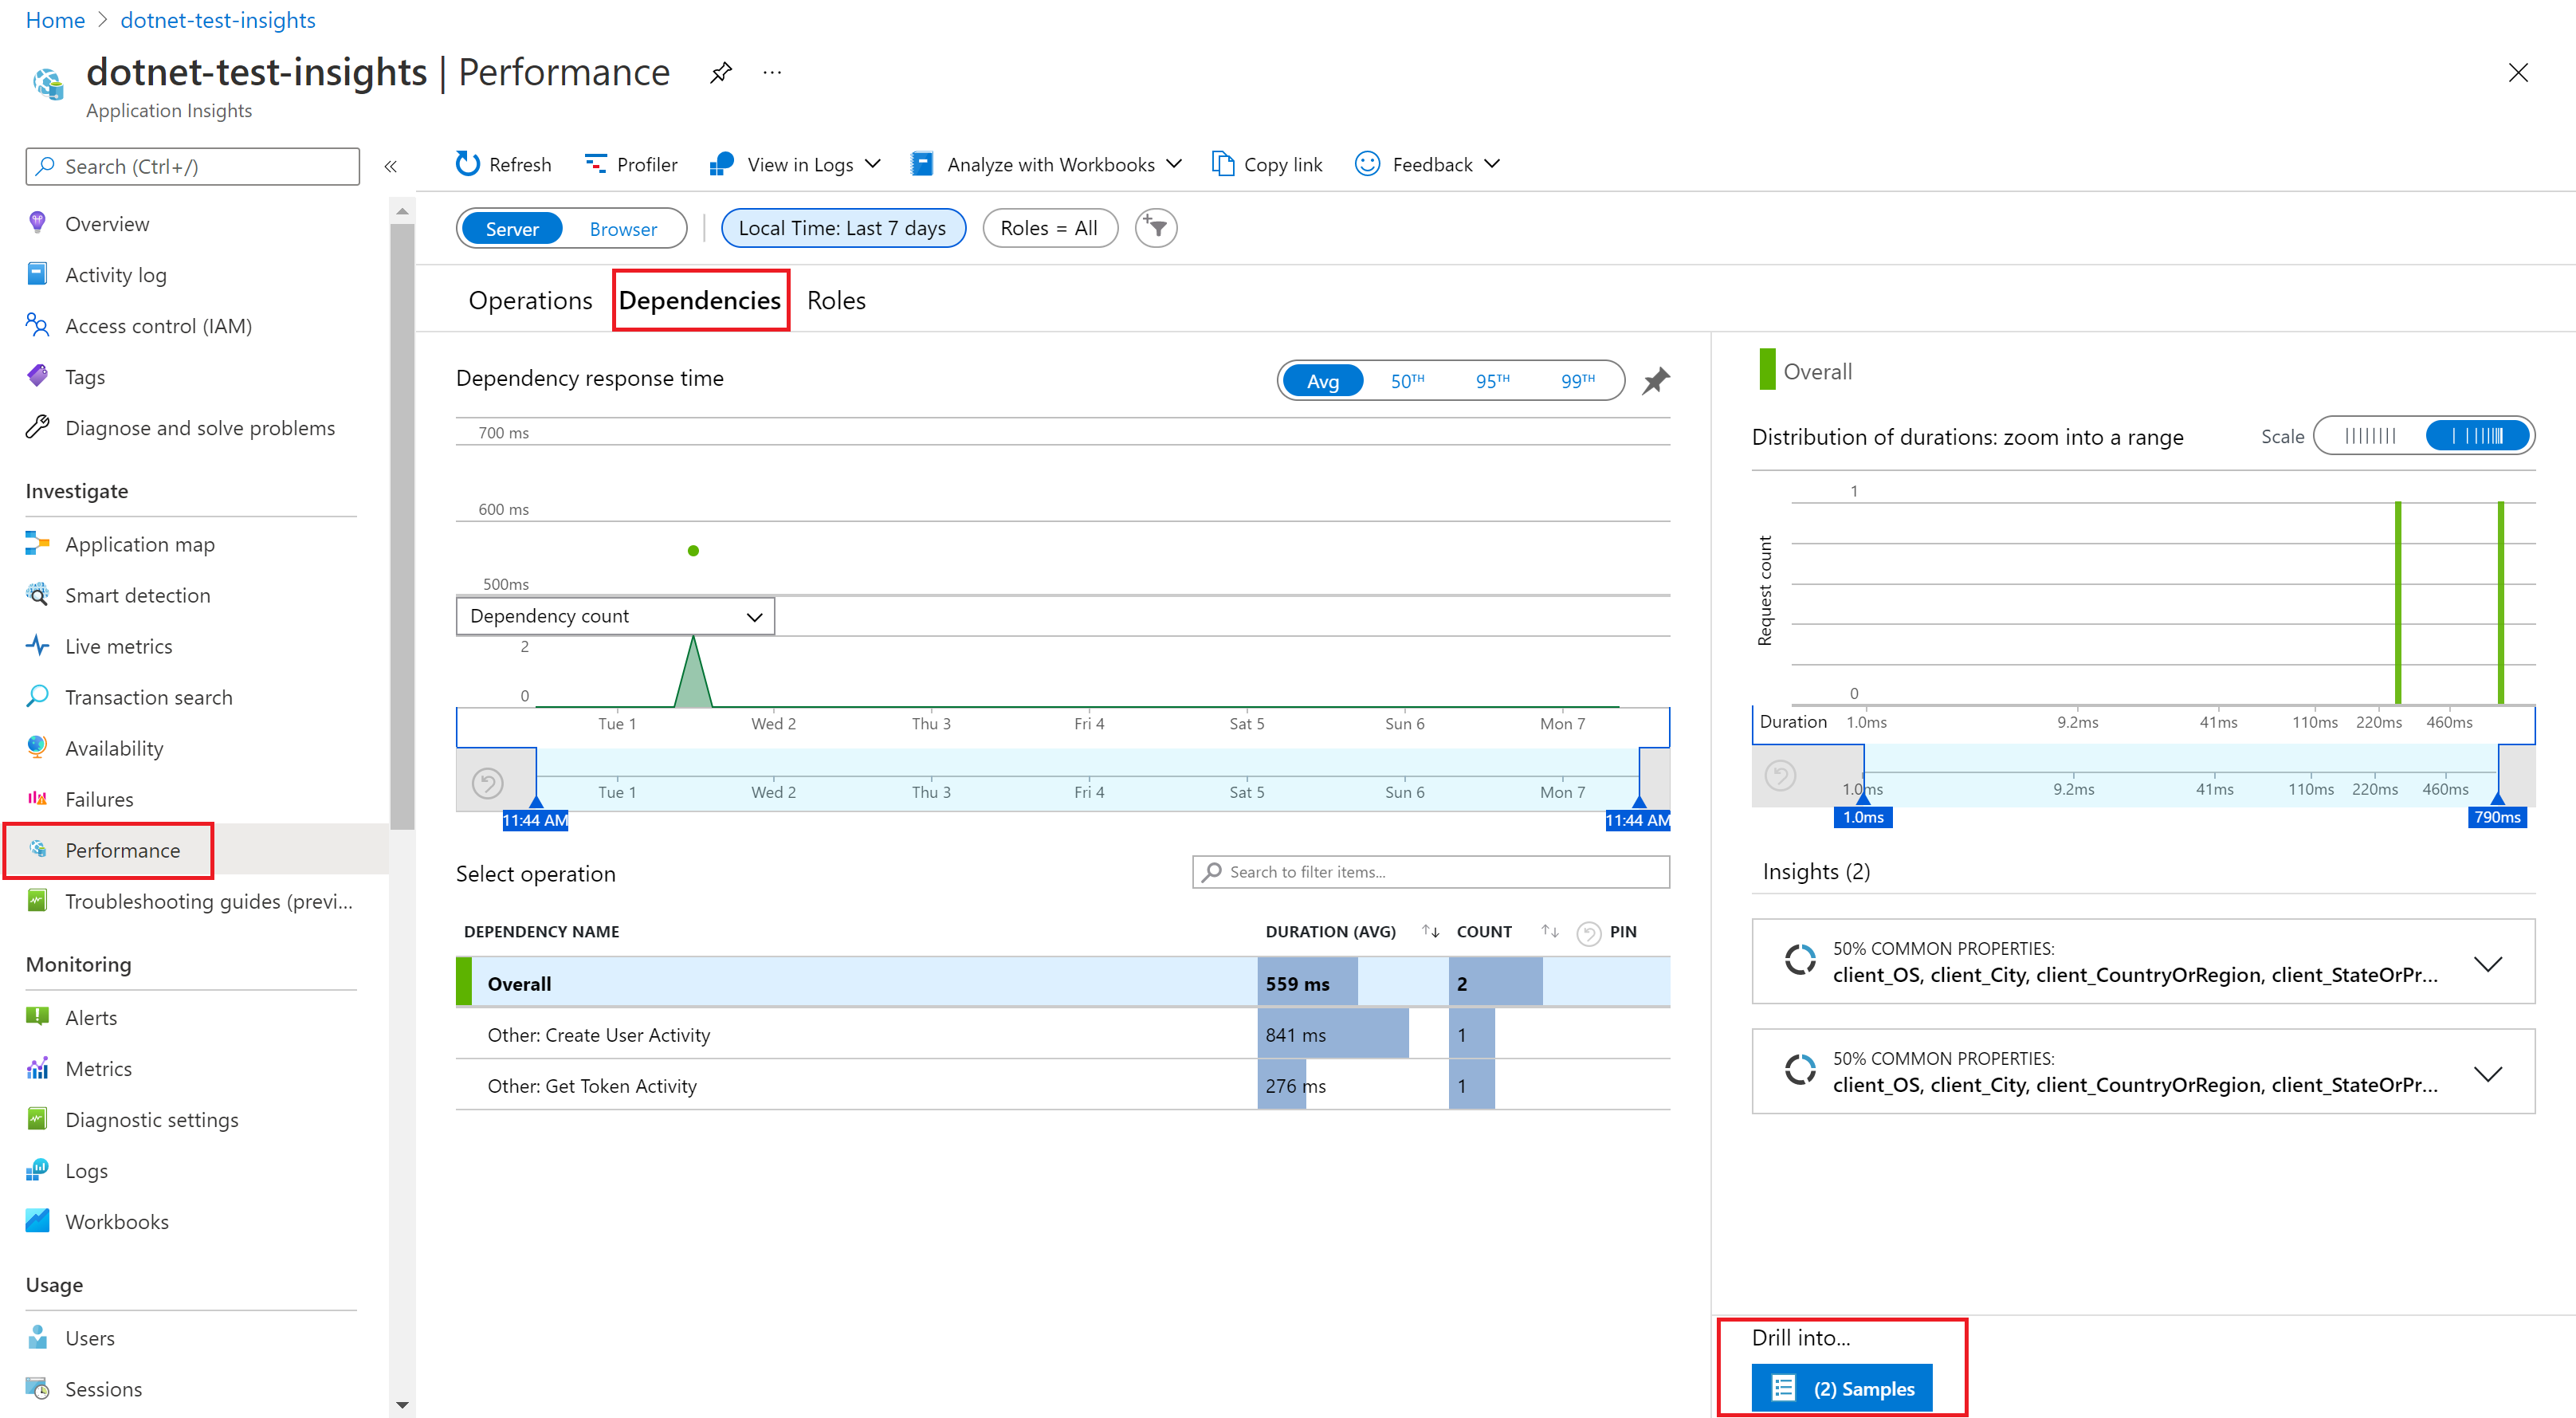 Screenshot showing telemetry data entries in Application Insights.